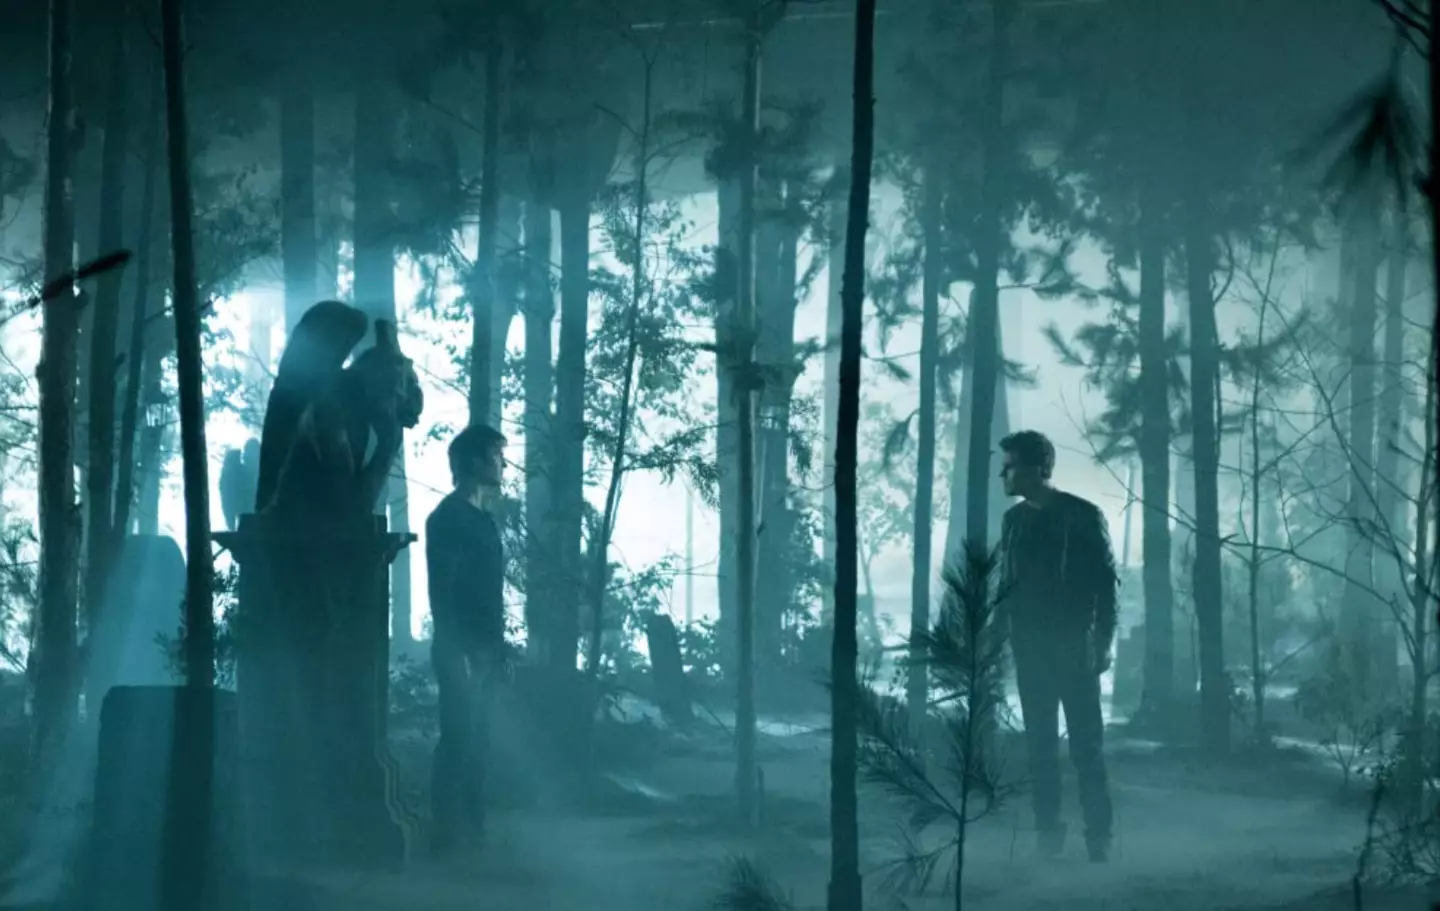 Characters from The Vampire Diaries in an eerie wood.